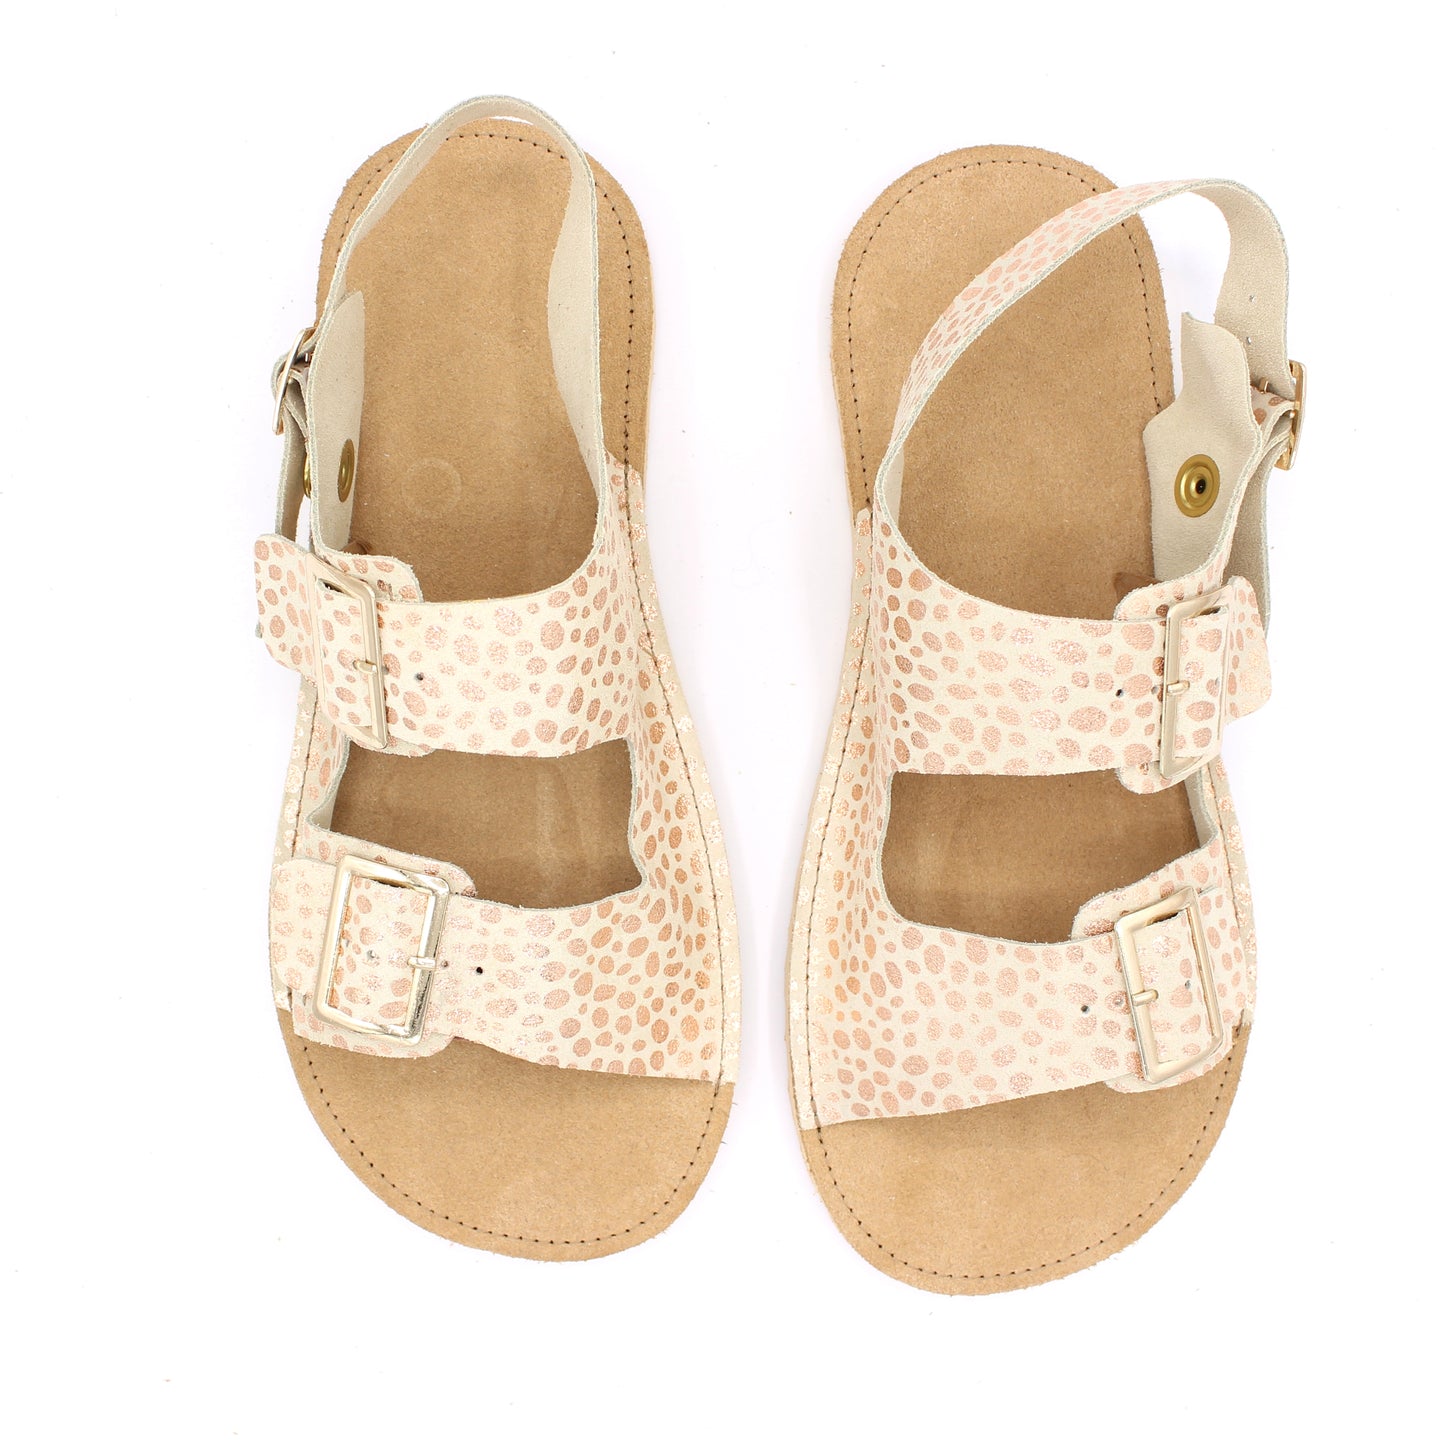 Ladies Buckle Sandals with Snaps - Rosie Dalmation - Rugged Soles